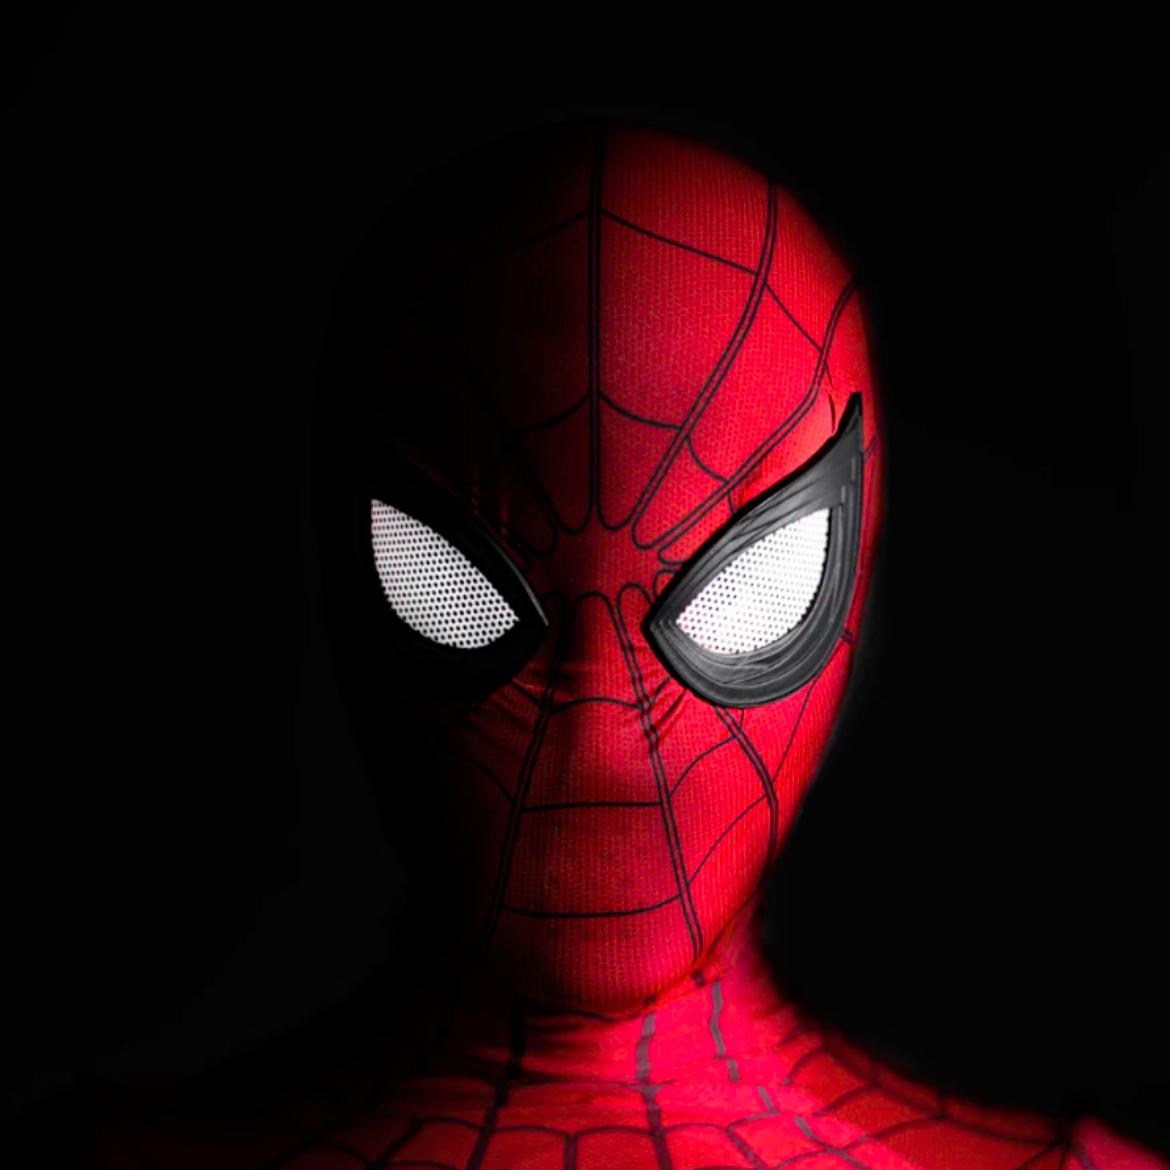 Spider-Mangirly's images